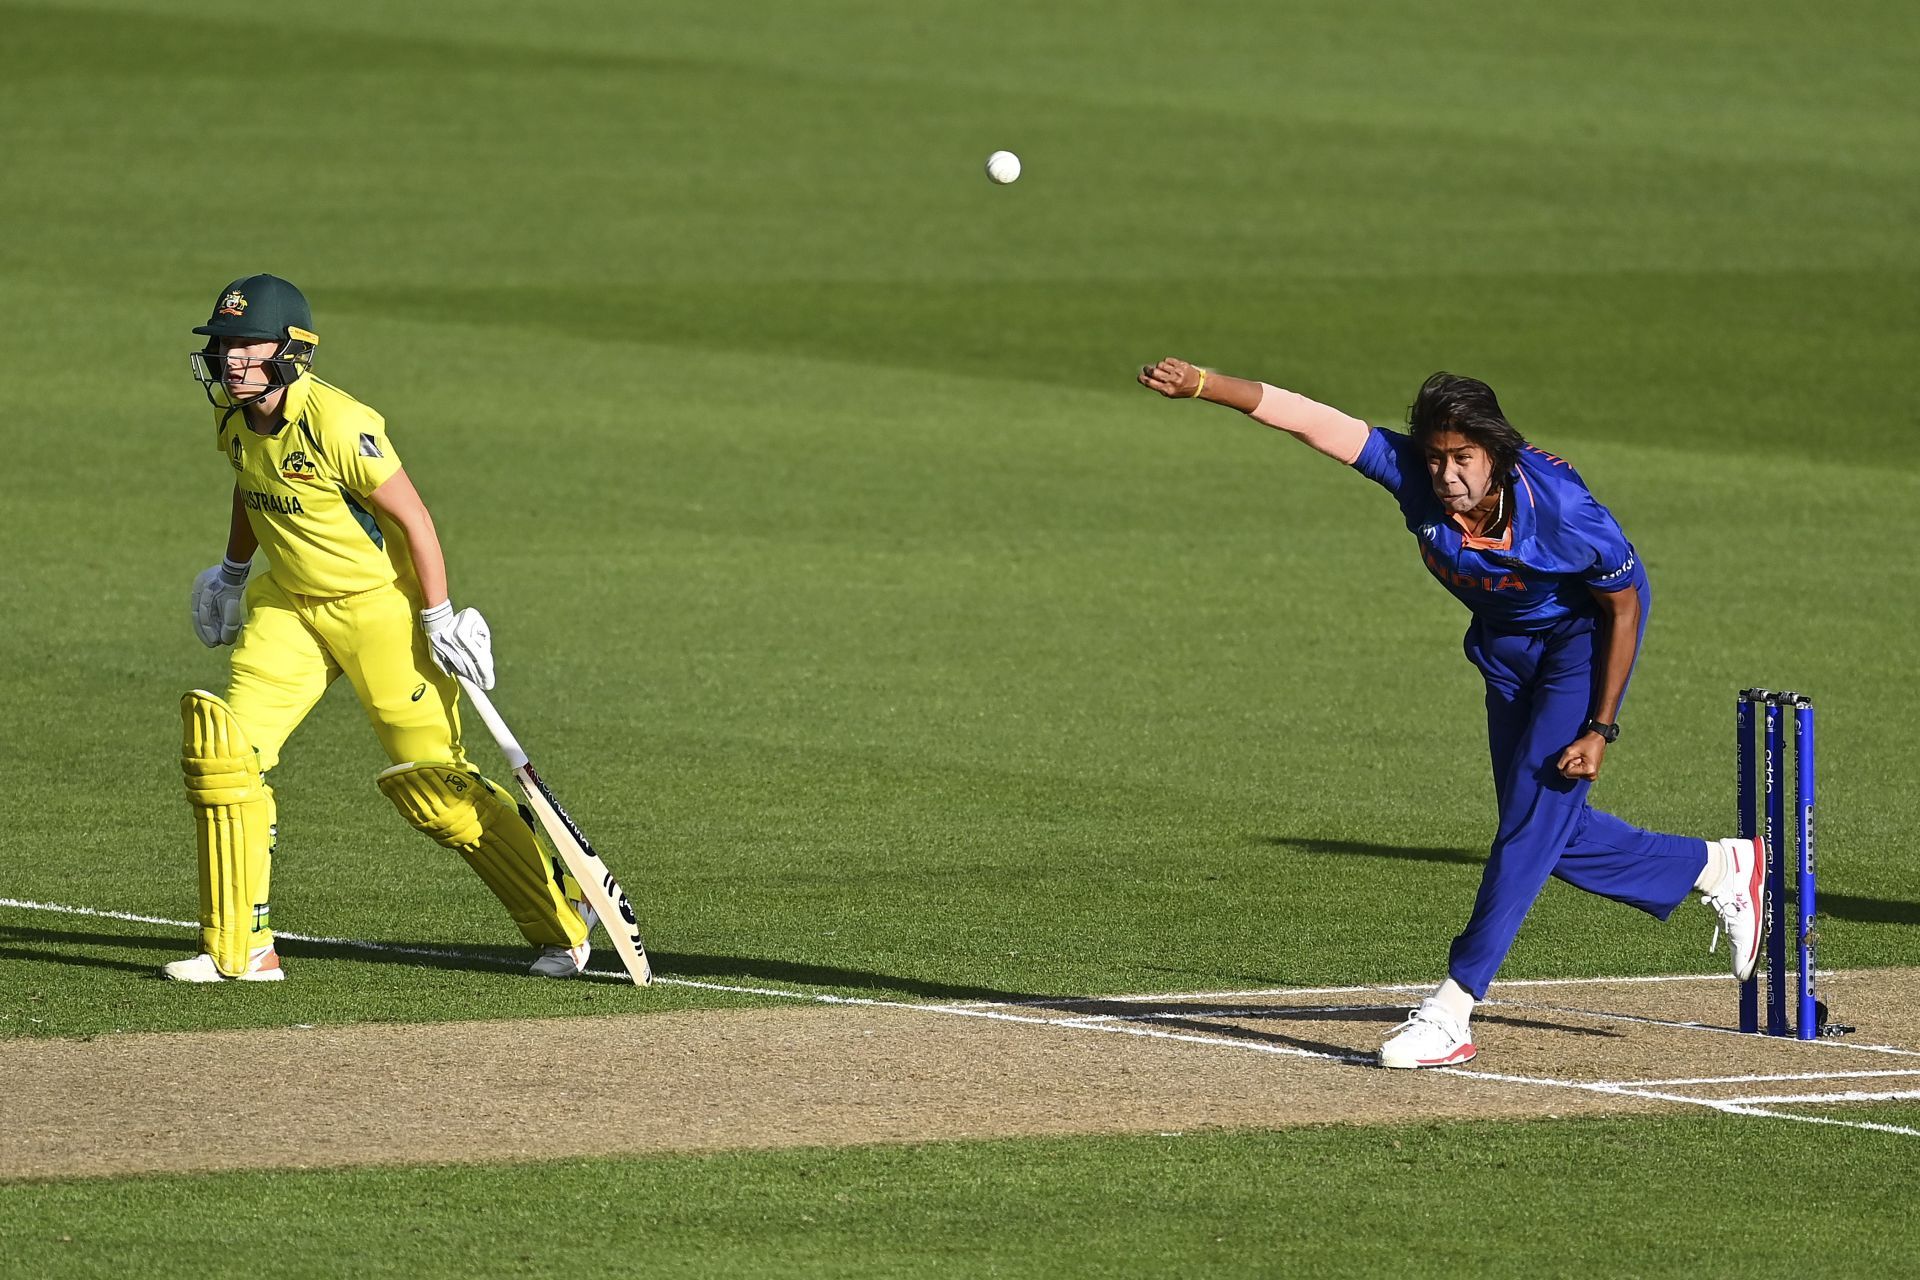 Jhulan Goswami will be need to step up and deliver for India in the rest of the 2022 World Cup